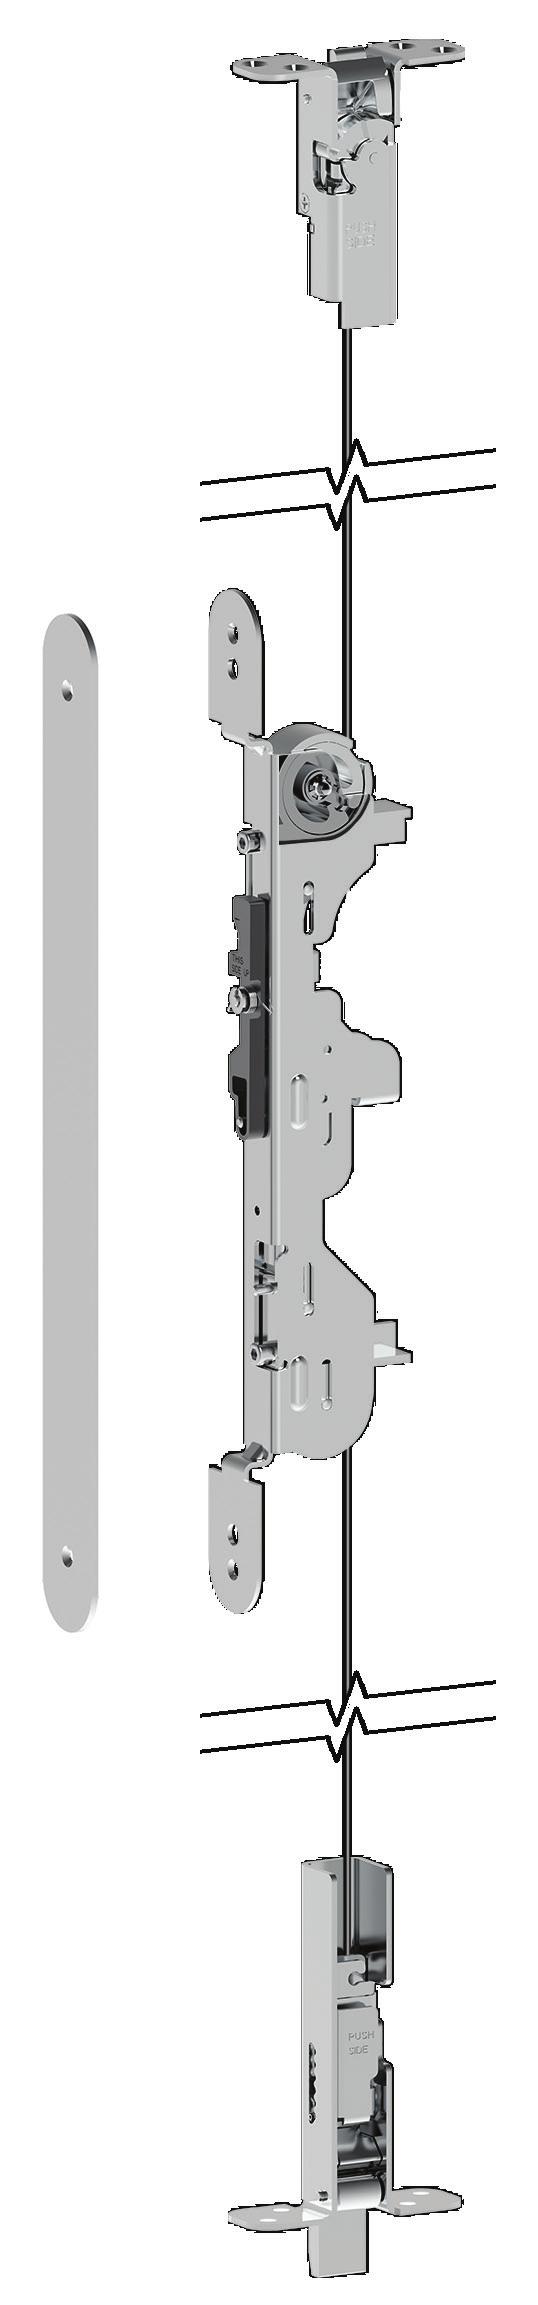 narrow stile doors and 98/99 series exit devices for normal (wide) stile doors Concealed vertical cables instead of rods for quick installation and adjustment Self-adjusting bottom bolt that